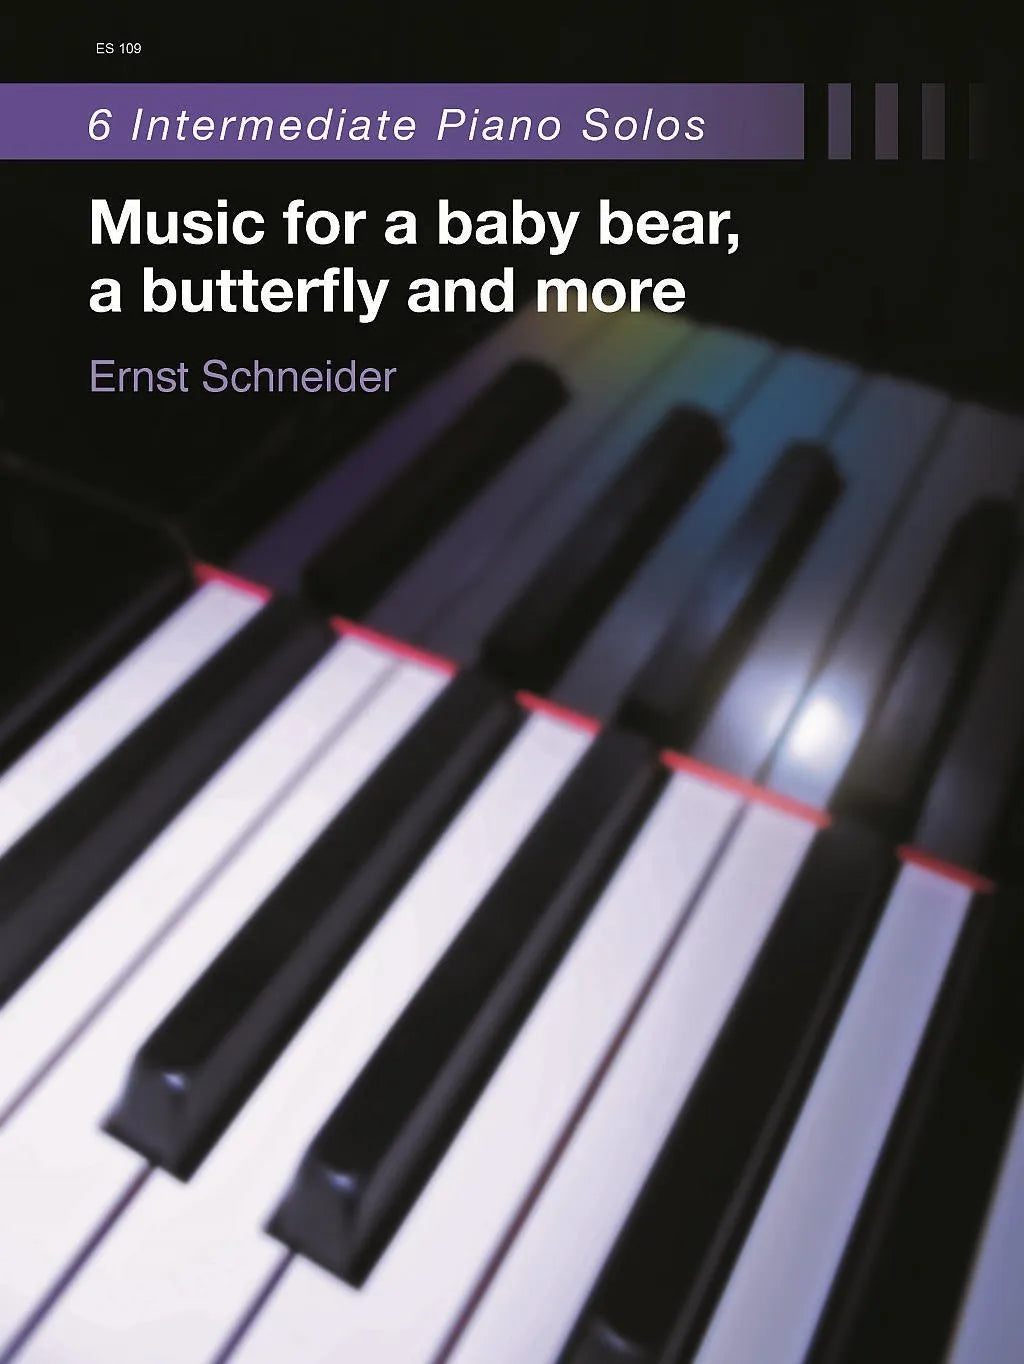 Music for a baby bear, a butterfly and more